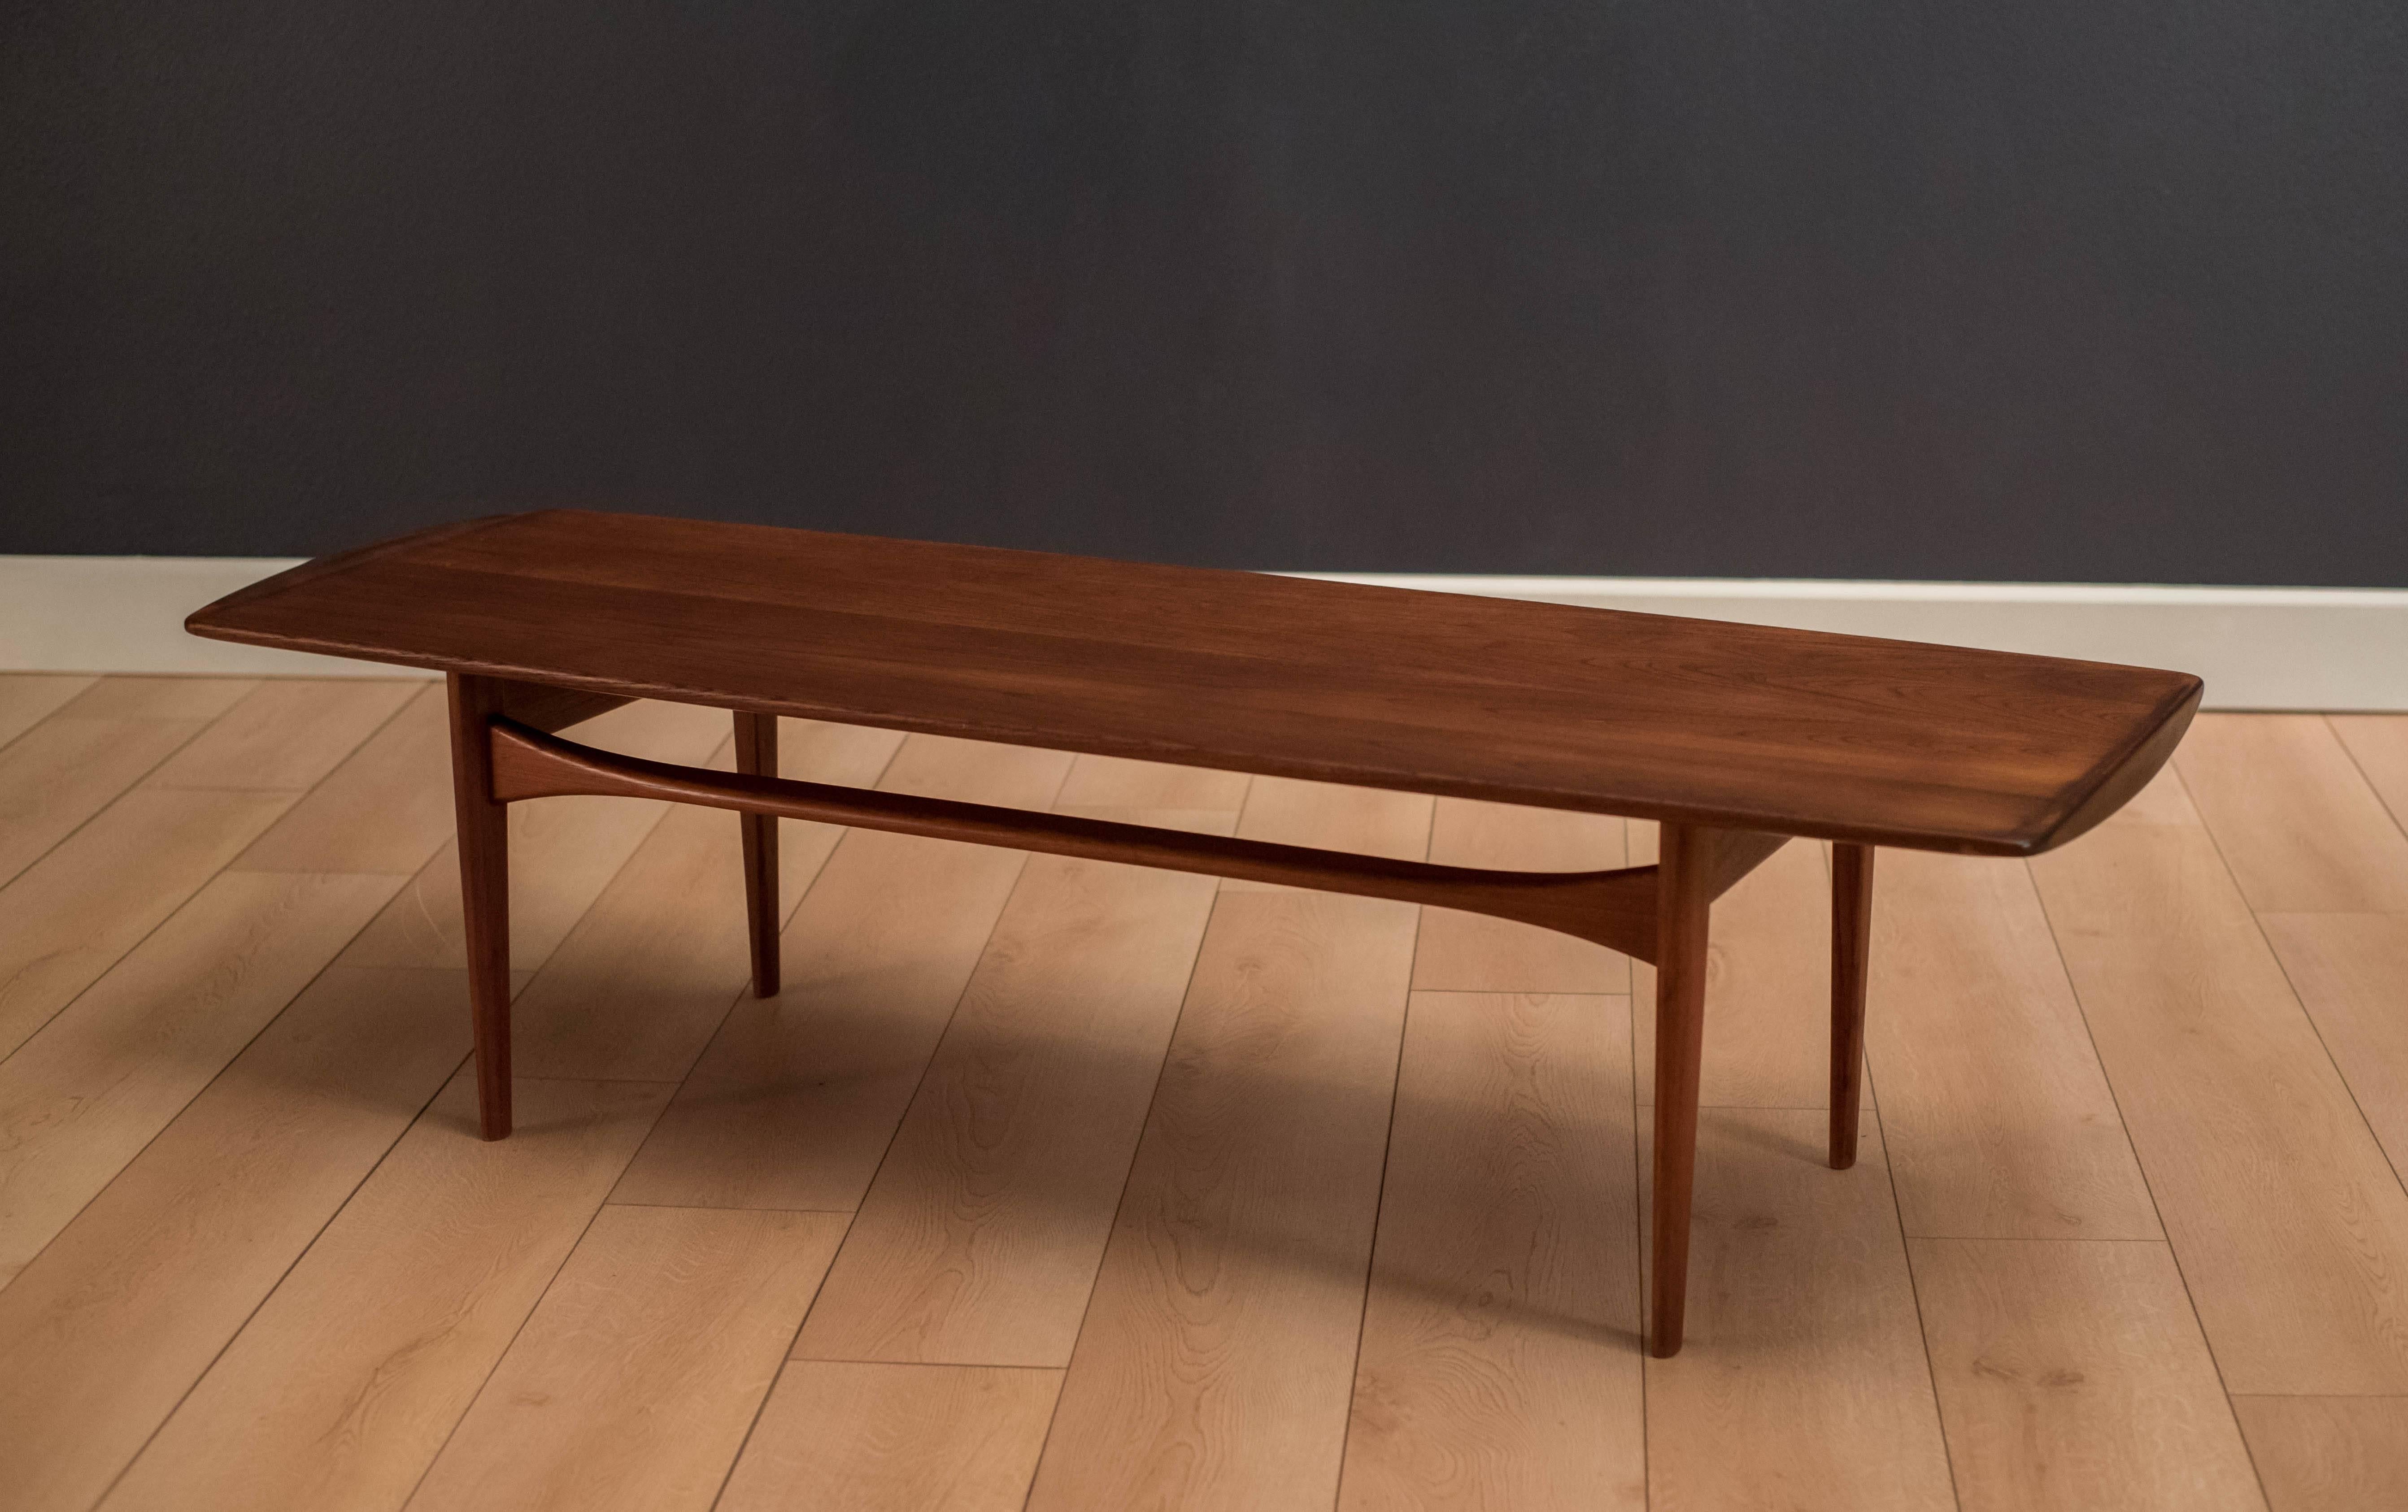 Danish modern coffee table by Tove and Edvard Kindt-Larsen for France & Daverkosen. This piece features a sculptural teak frame and sleek design. 

